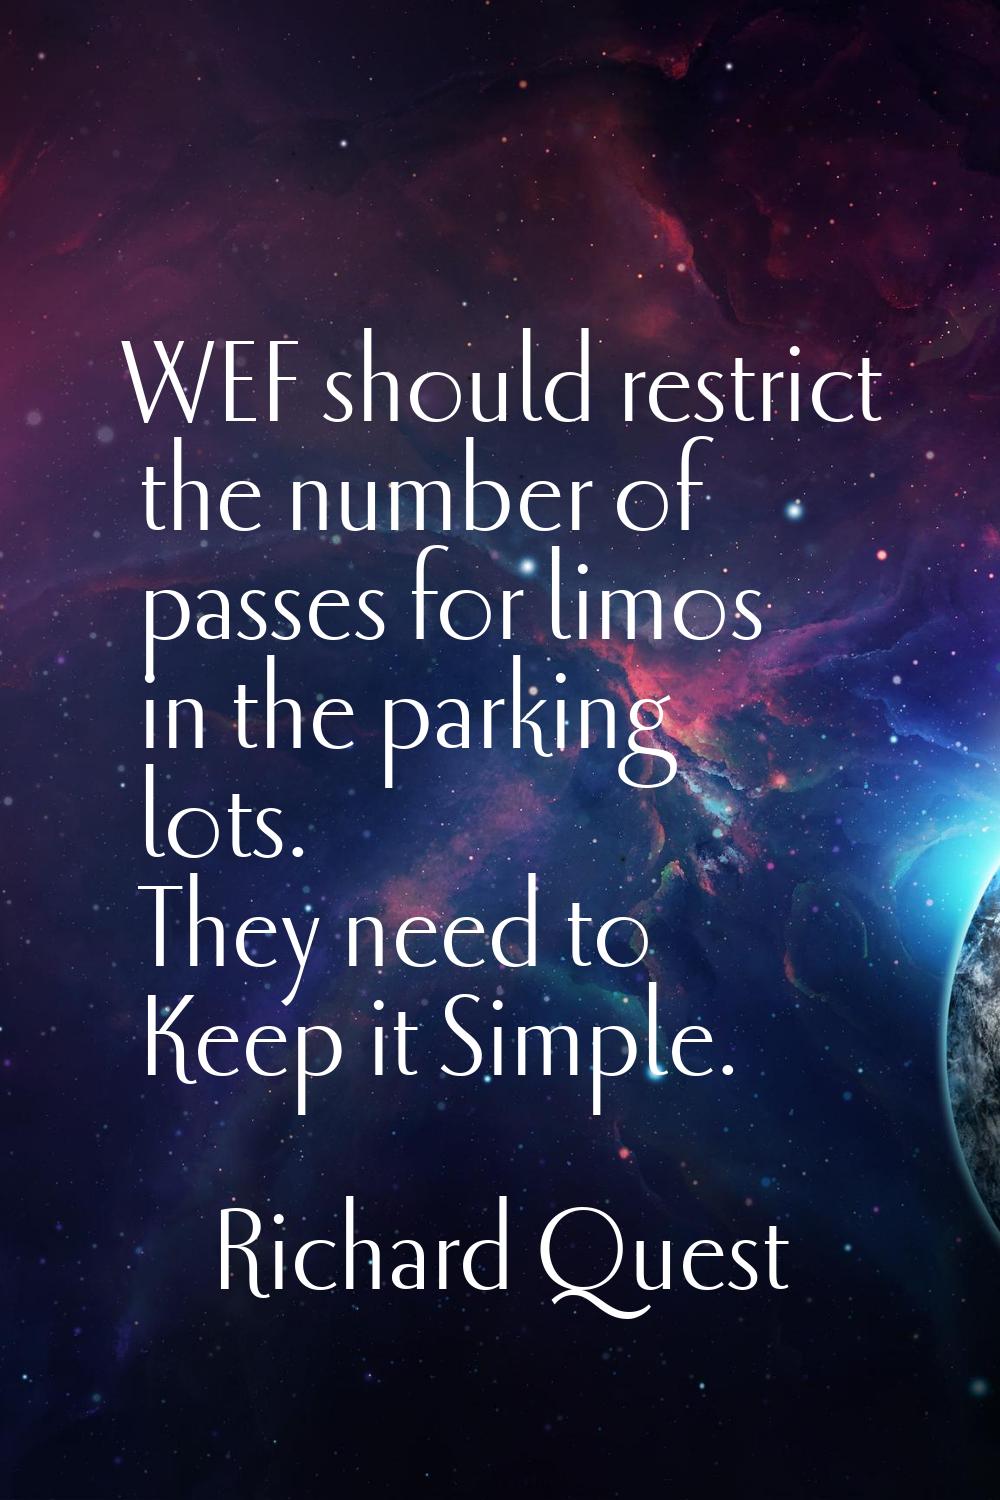 WEF should restrict the number of passes for limos in the parking lots. They need to Keep it Simple